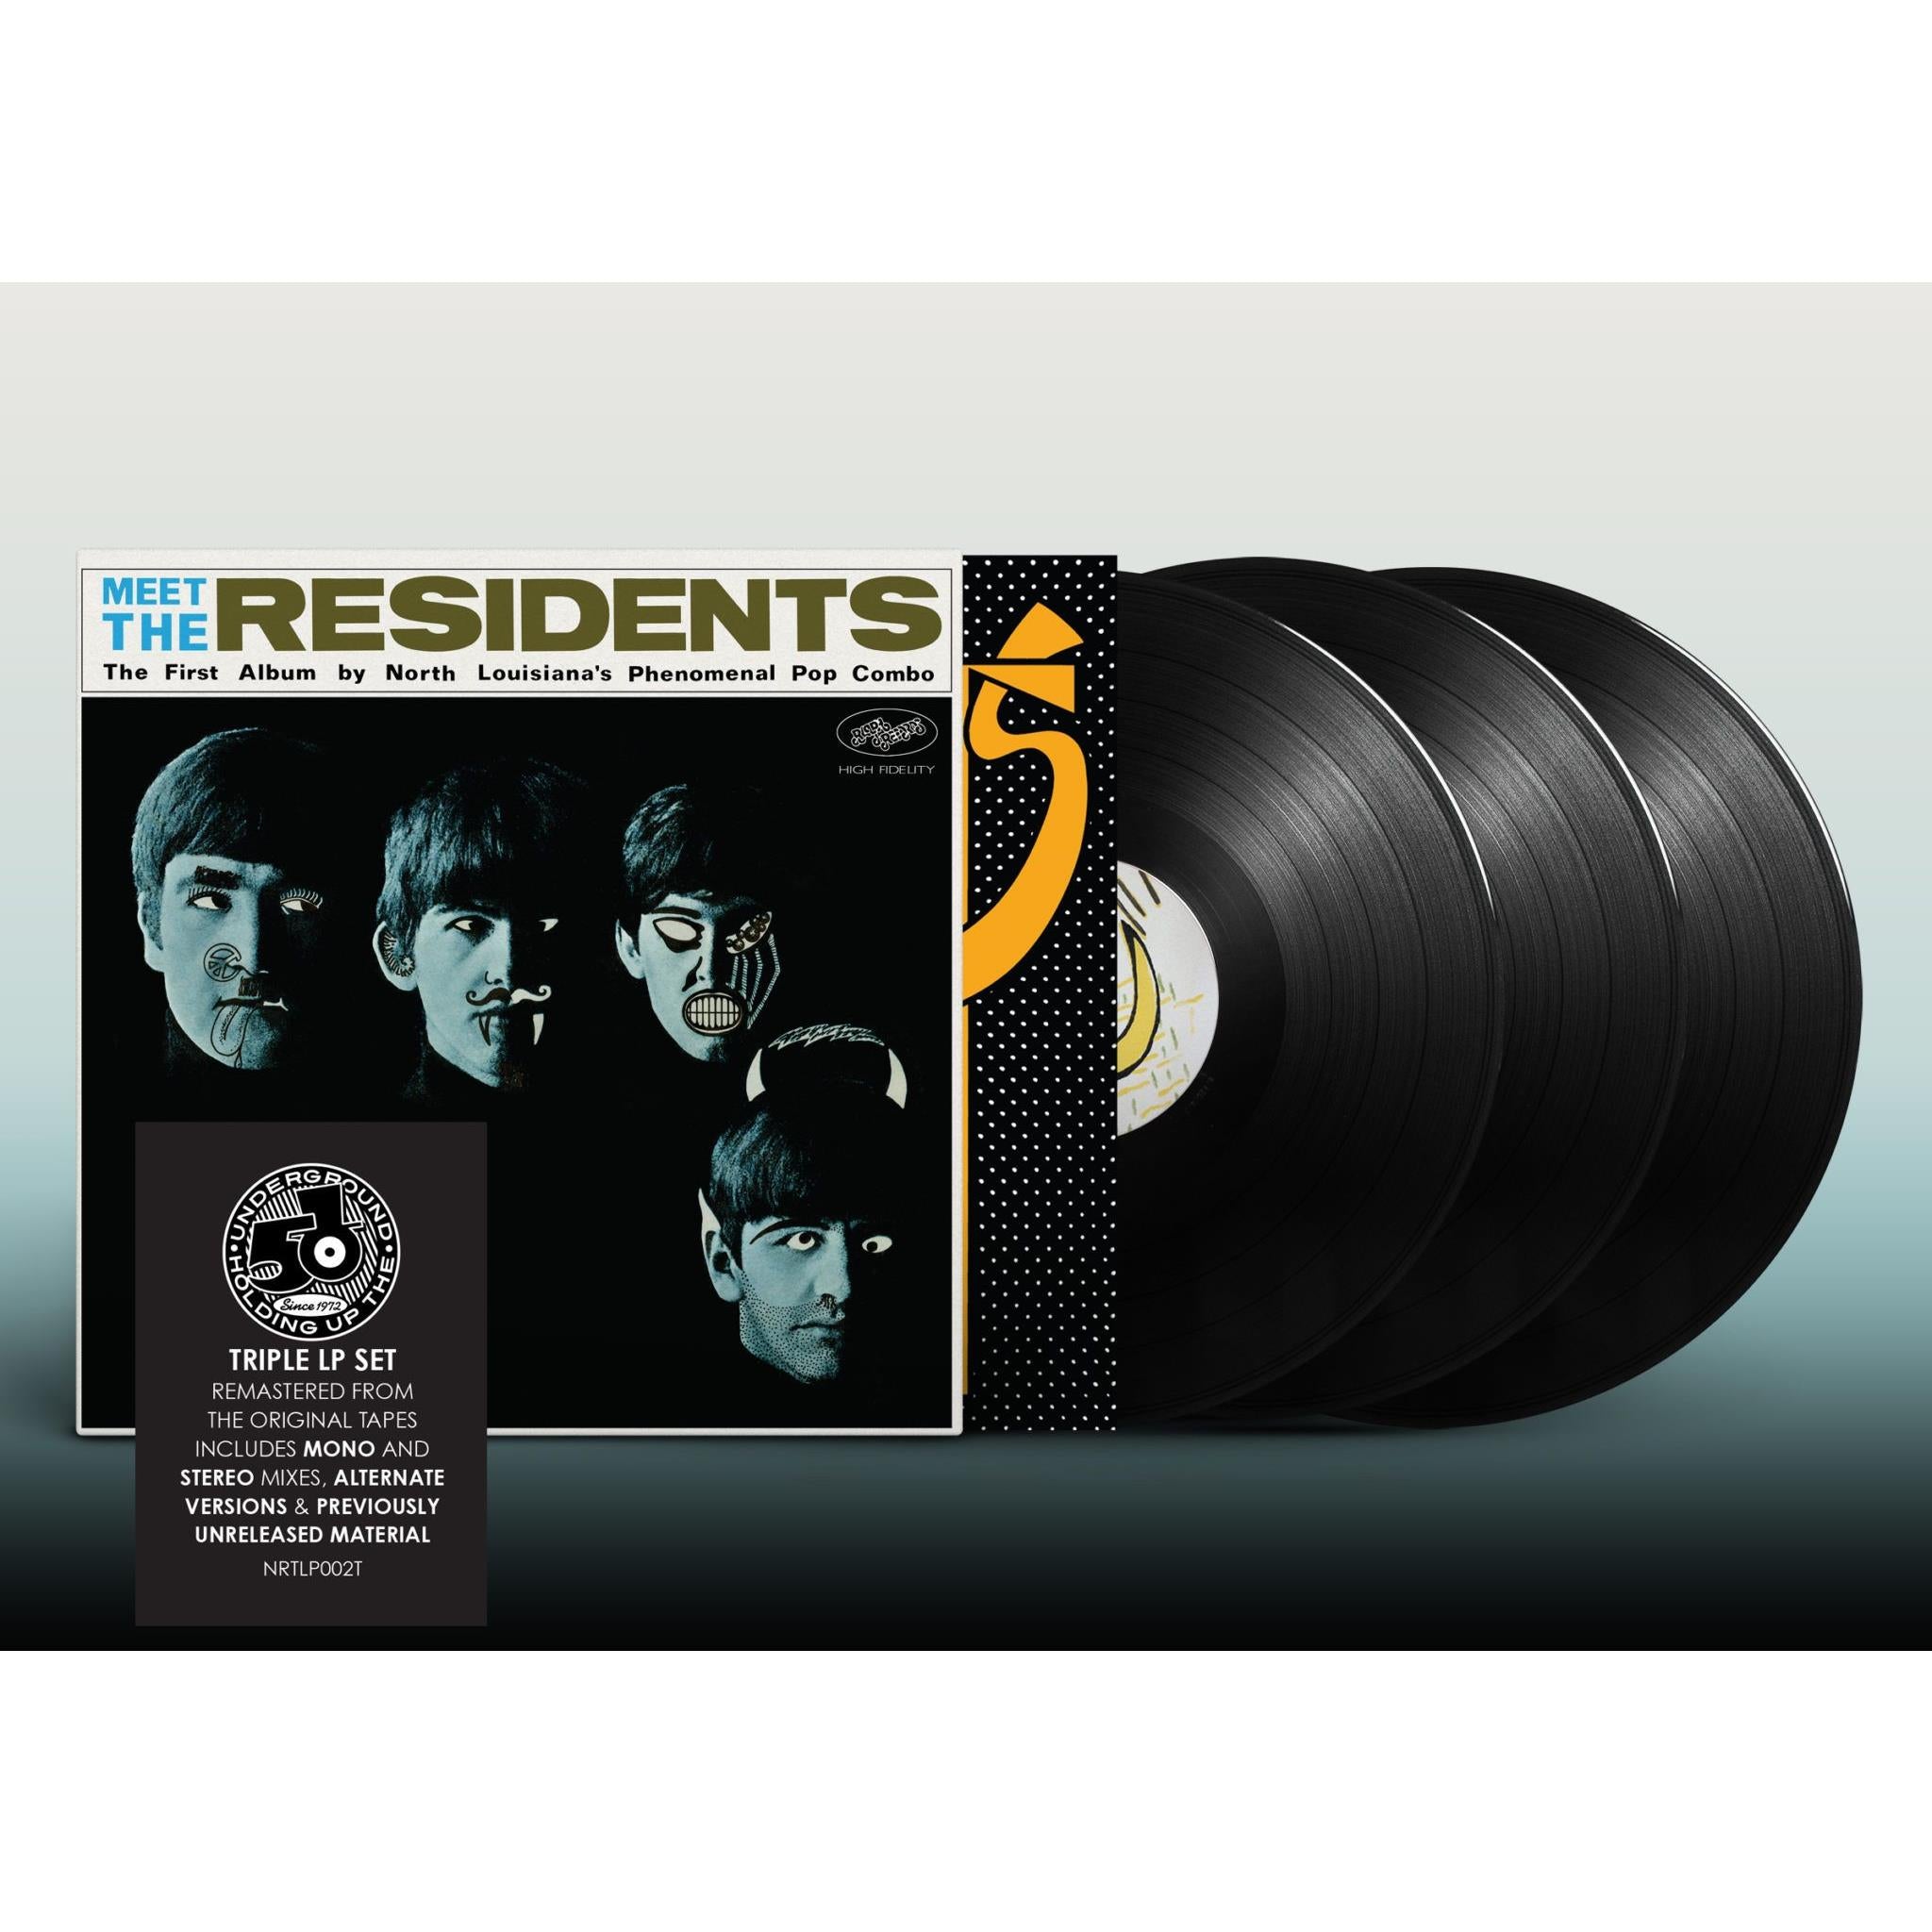 meet the residents (expanded vinyl edition)